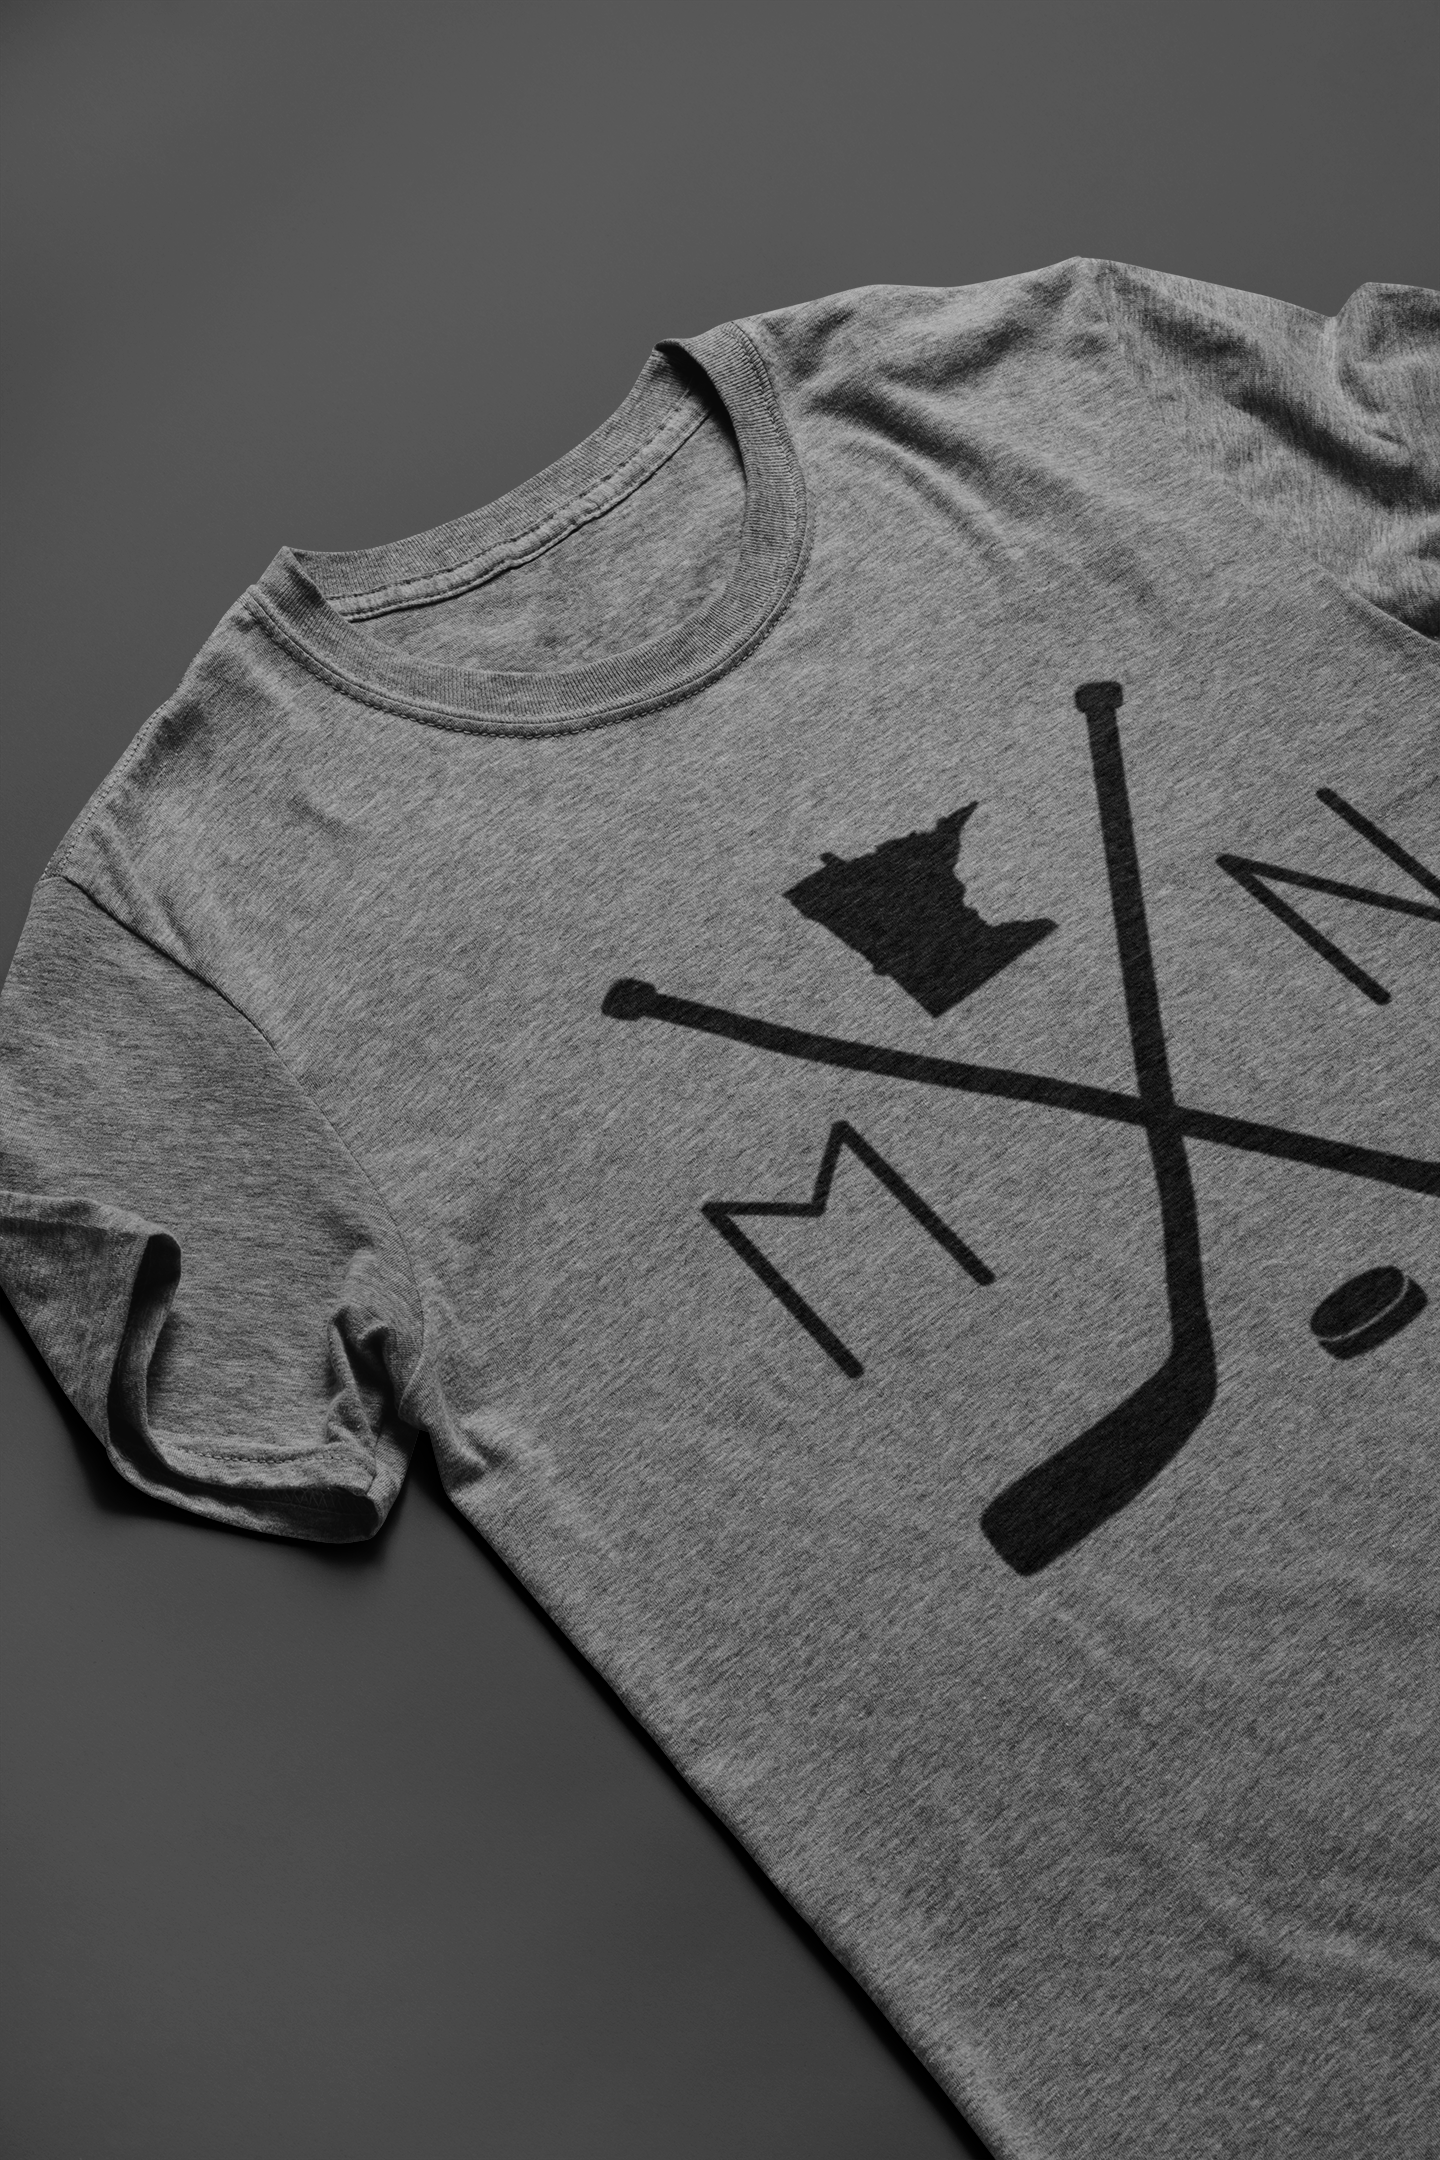 Heather Gray Minnesota Hockey T-Shirt. On the front has a black design with to hockey sticks faced like an X with a puck below in. An M to the left, an N to the right, and an outline of the state of minnesota up top. This is the front view of the shirt laid down "Style view"